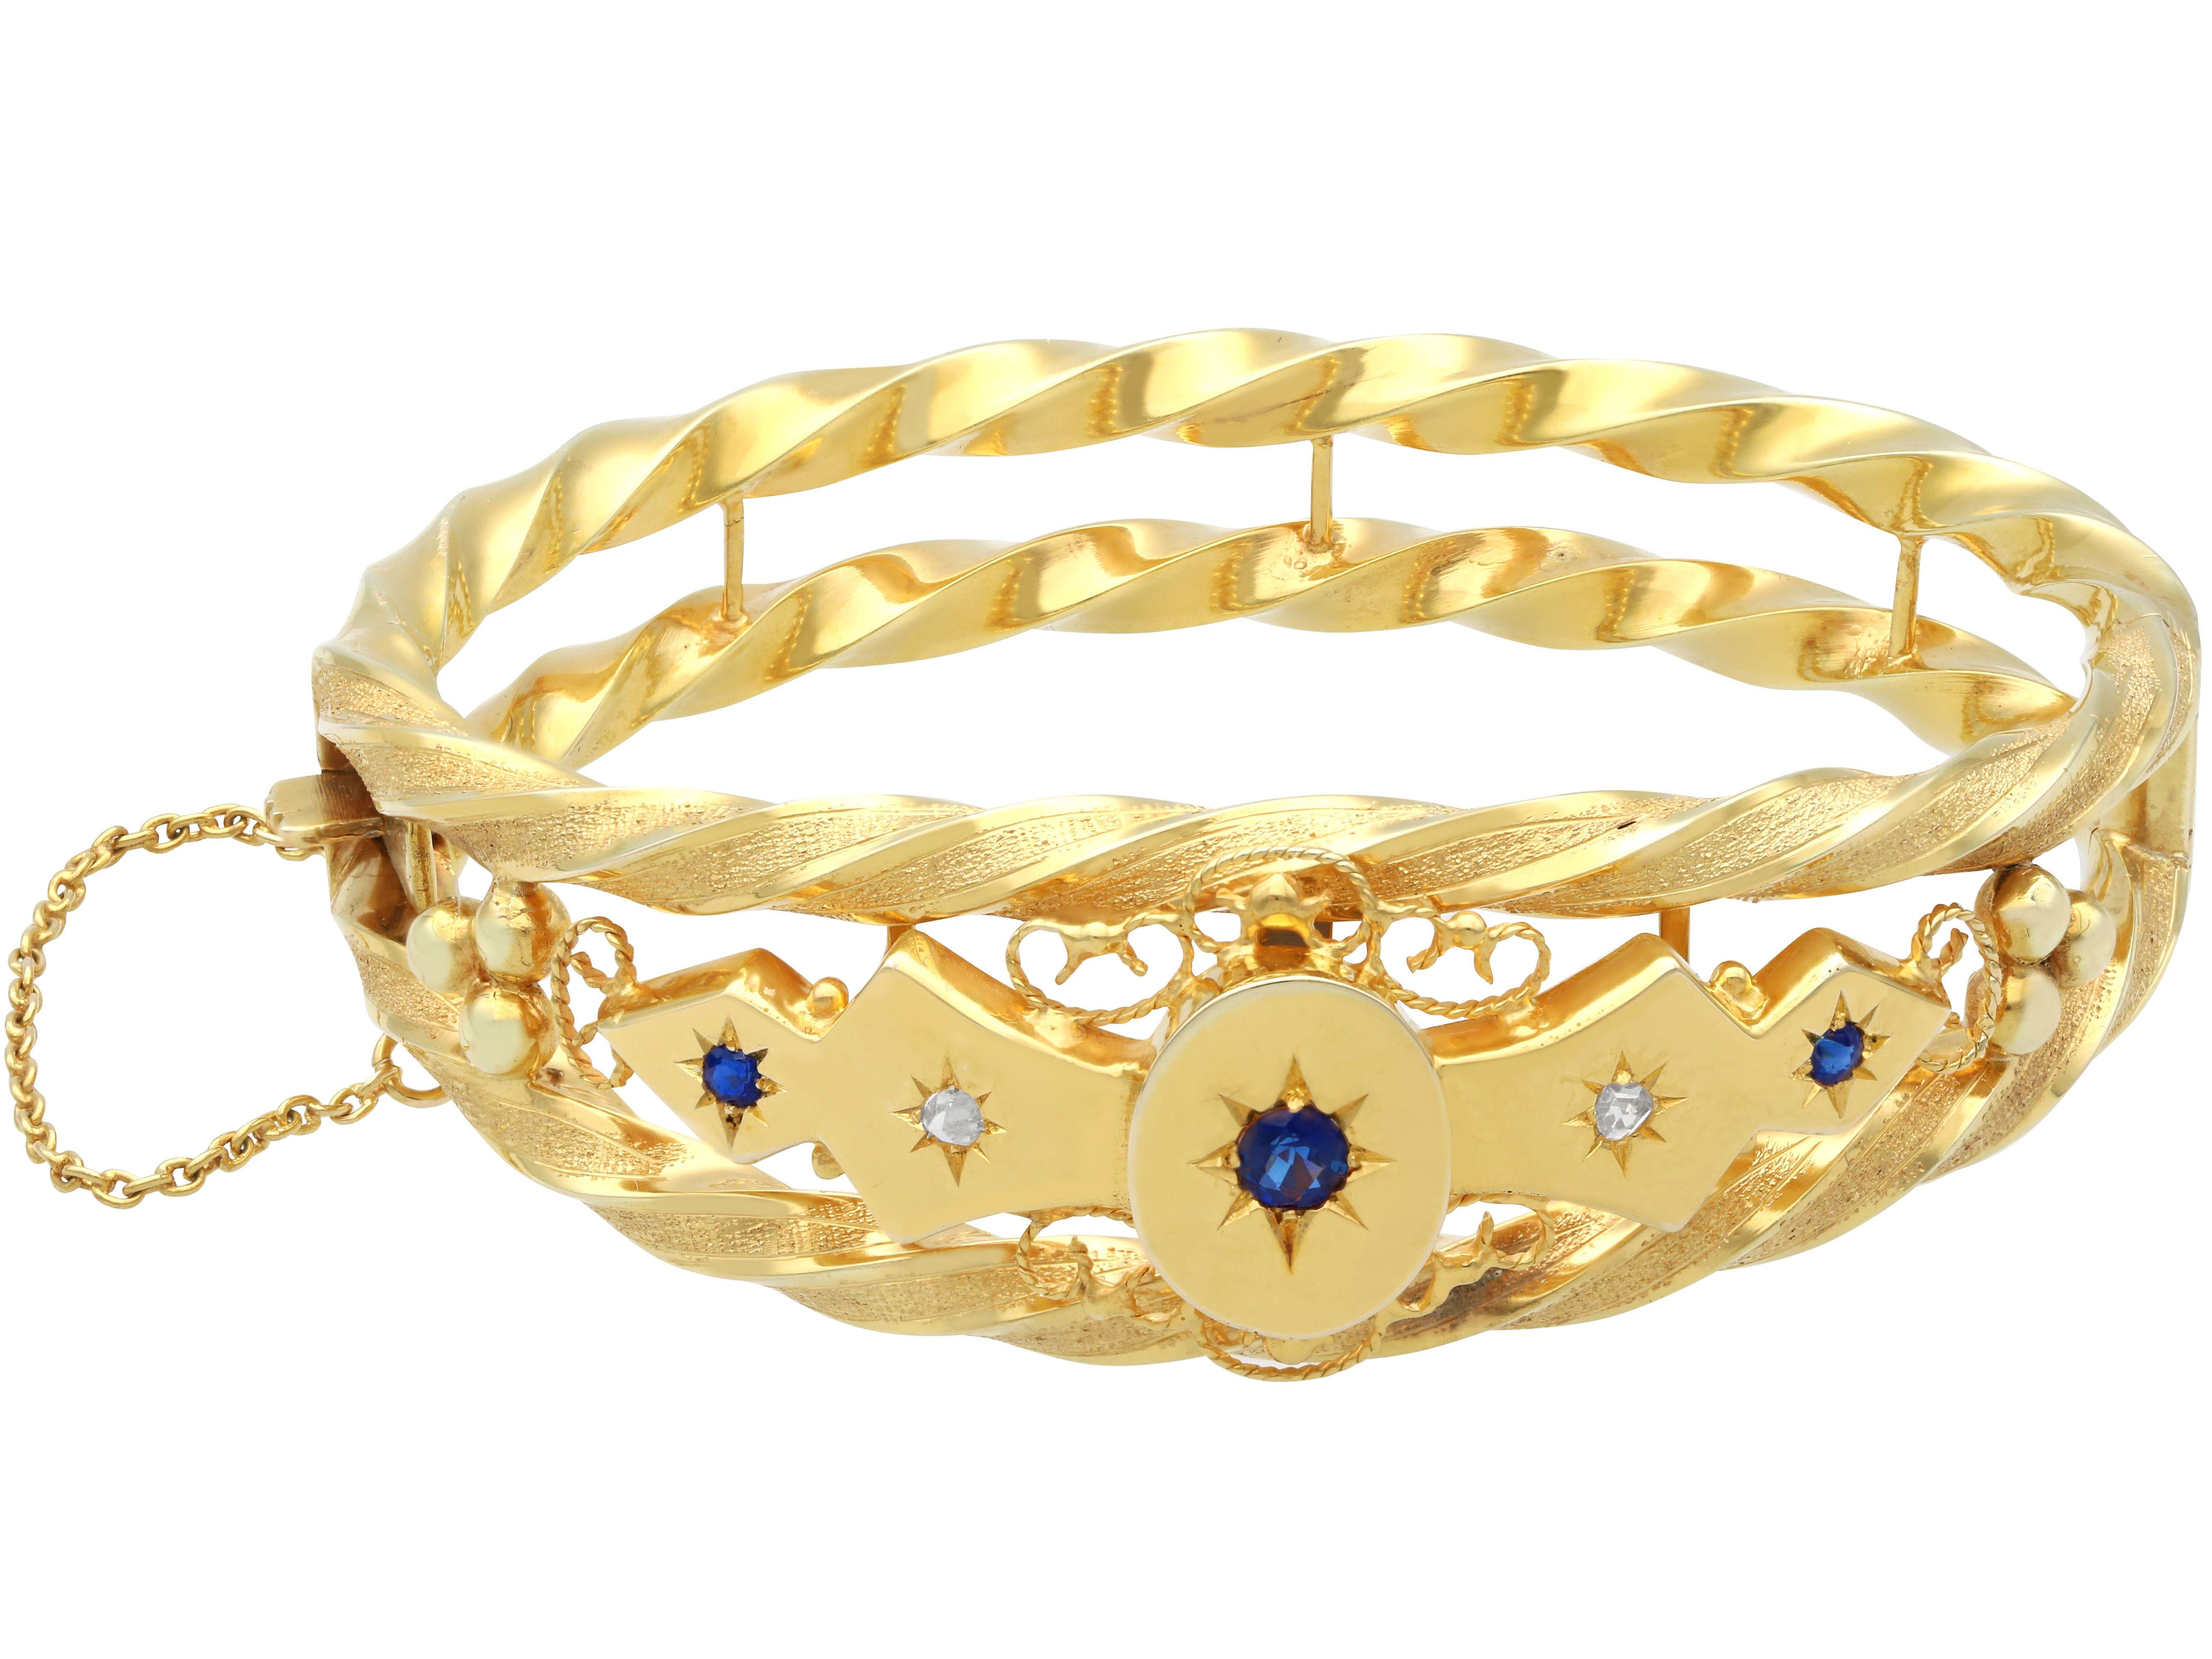 1900s Sapphire and Diamond Yellow Gold Bangle   In Excellent Condition For Sale In Jesmond, Newcastle Upon Tyne